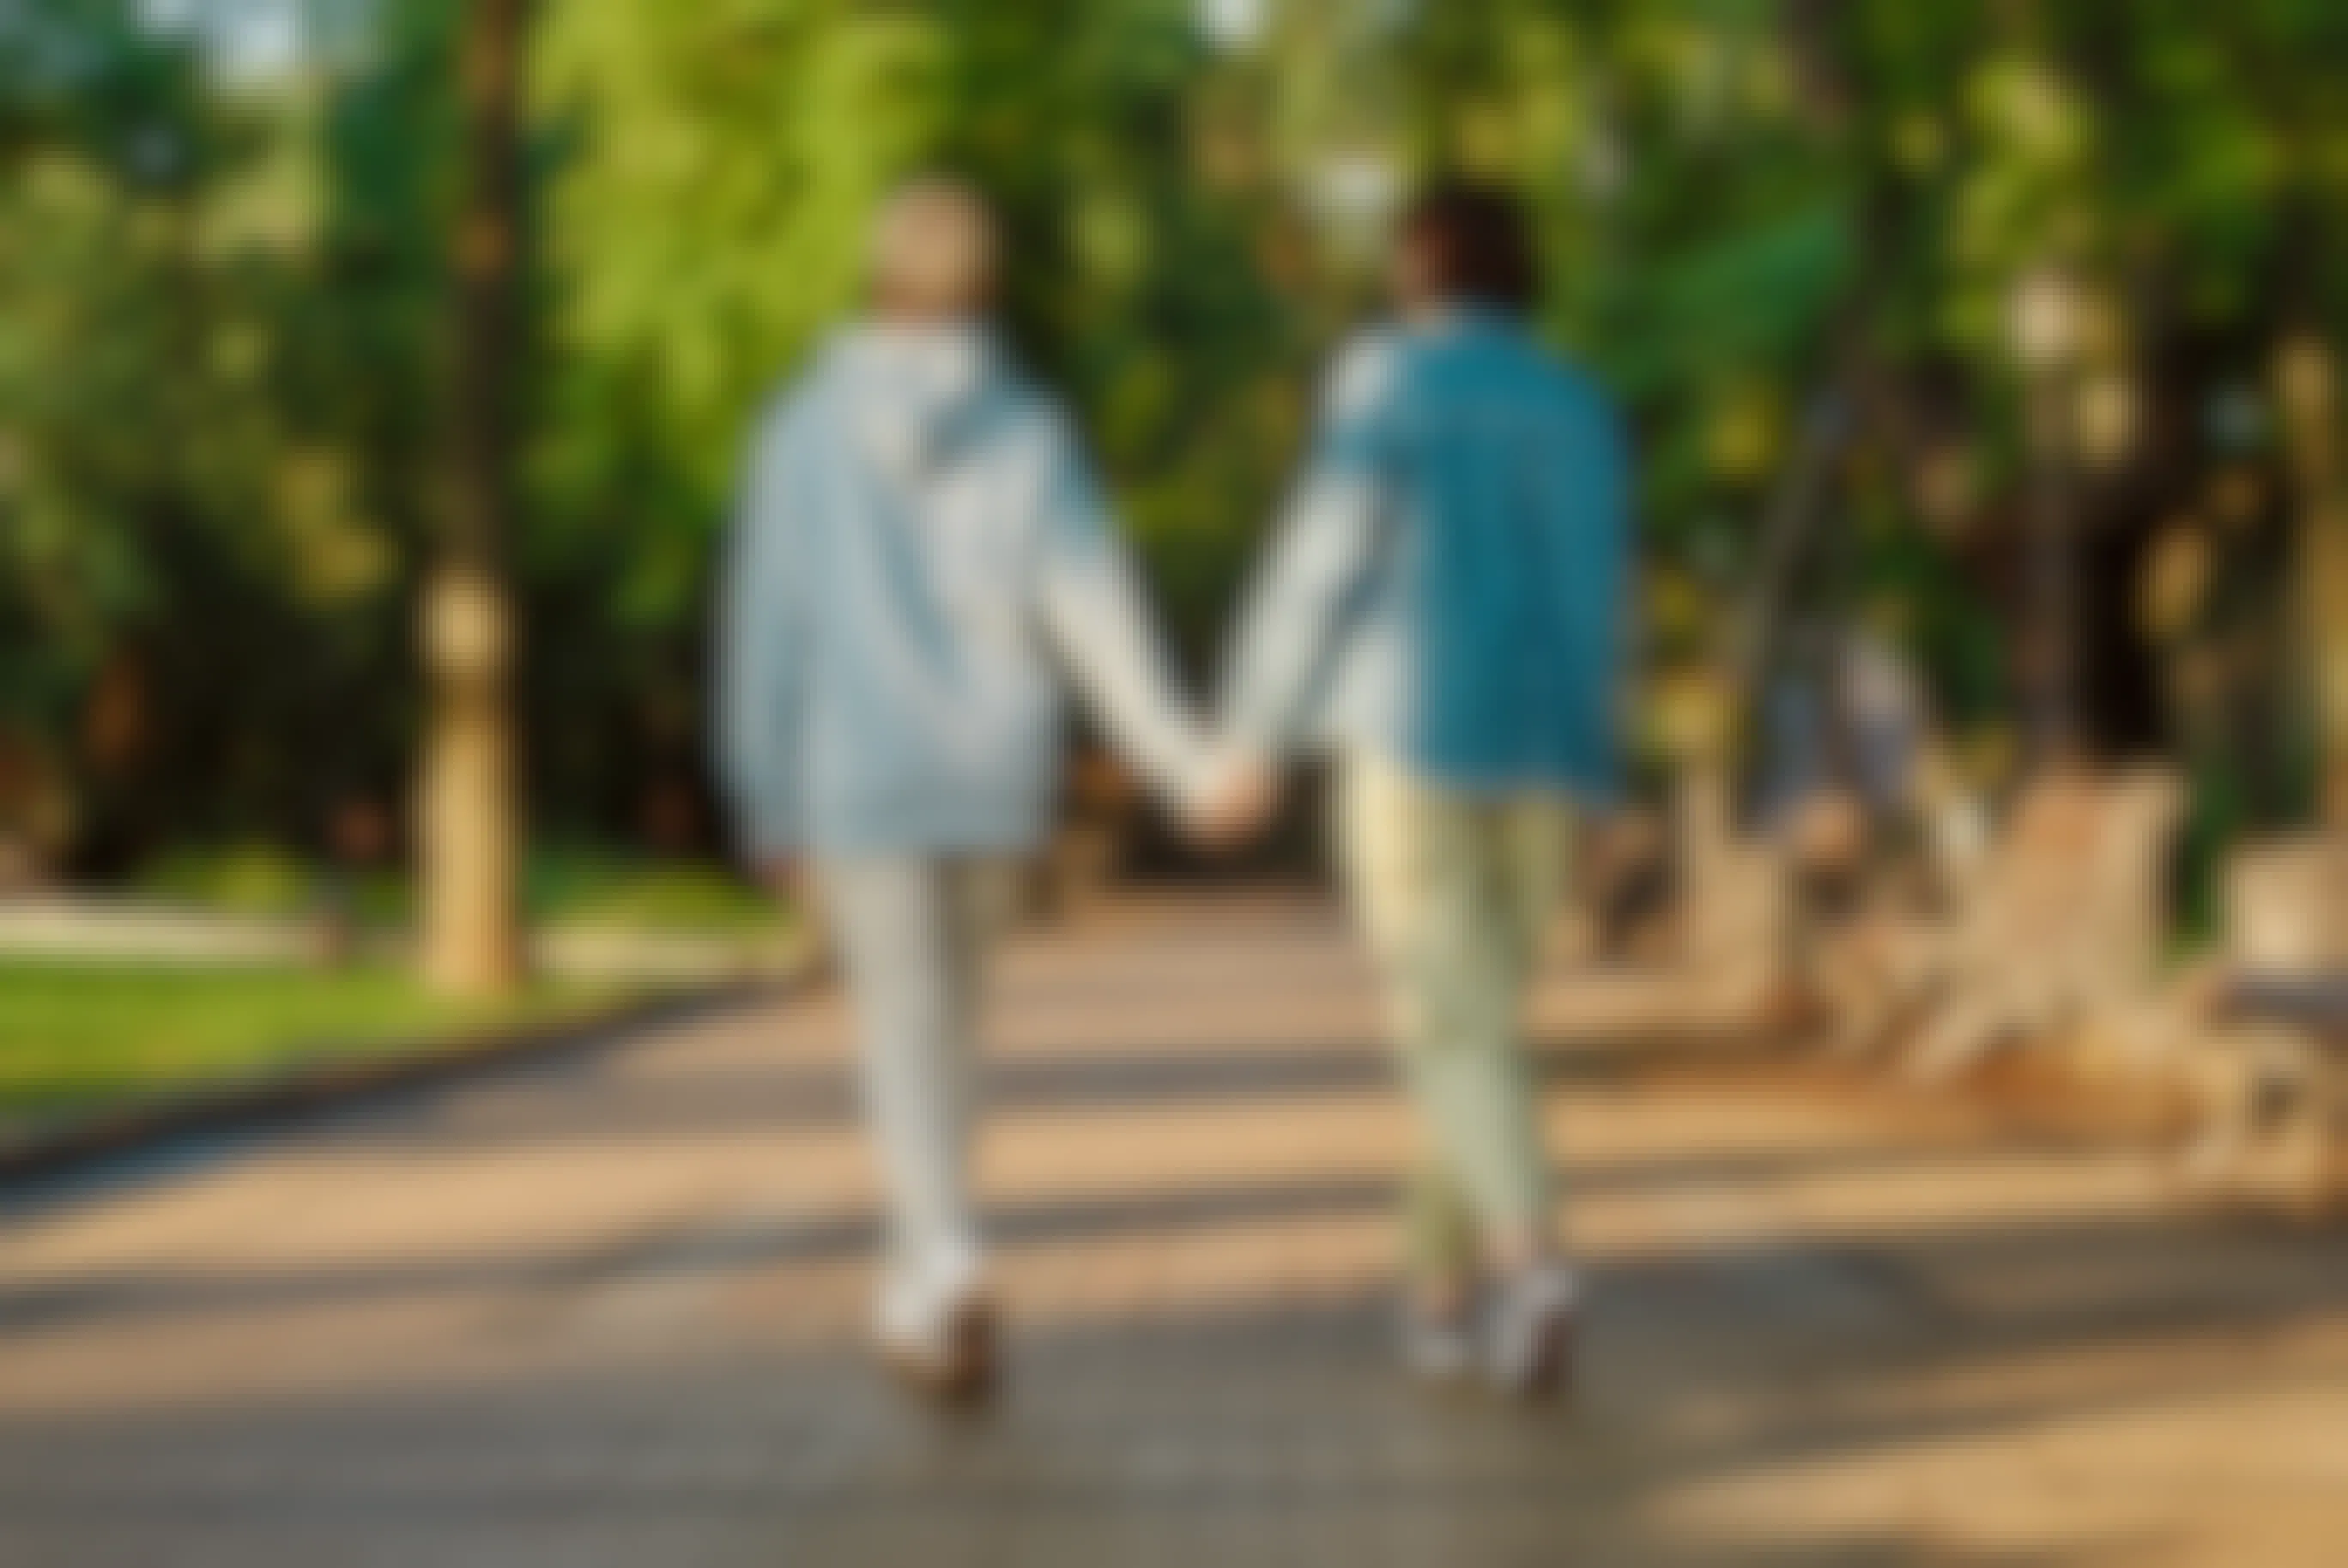 Two people holding hands and taking a walk in a park